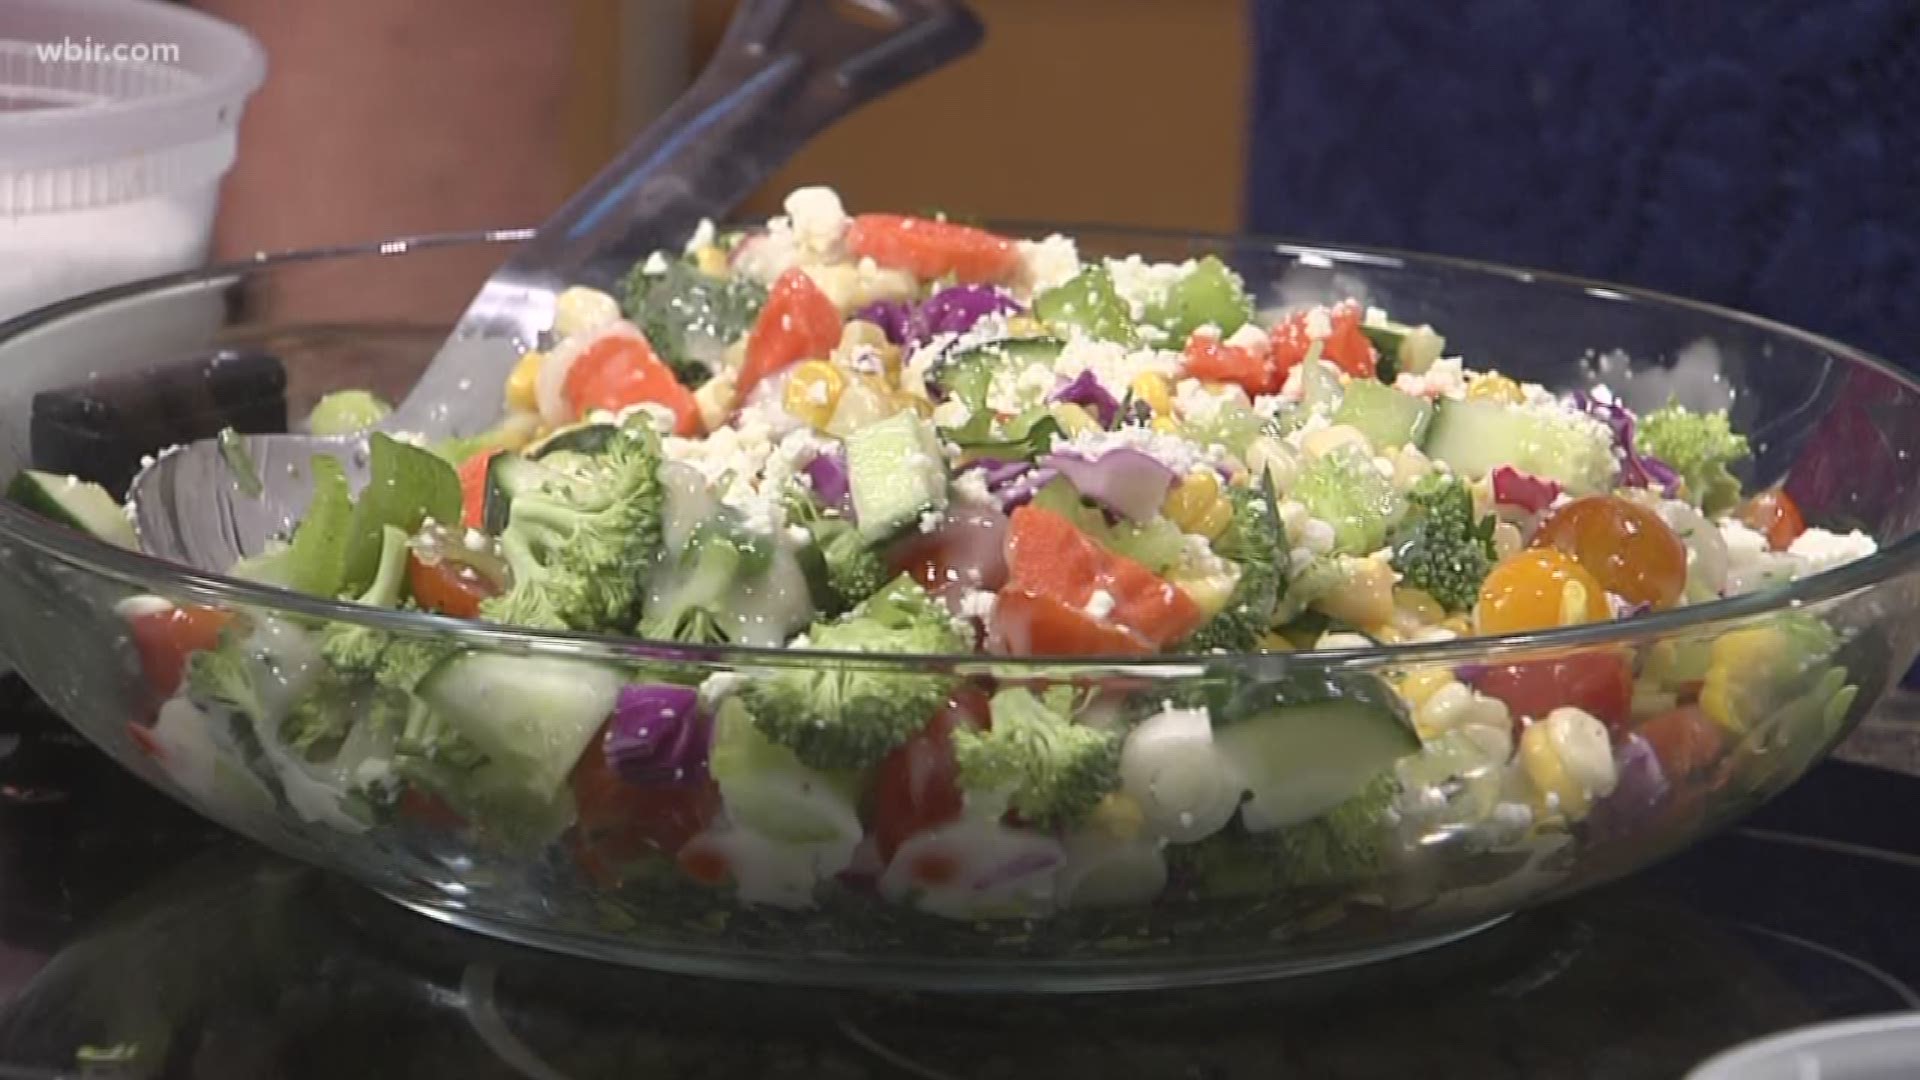 Today, Kim Wilcox from It's All So Yummy Cafe is joining us in the kitchen. She is going to show us how to make a fresh veggie salad.